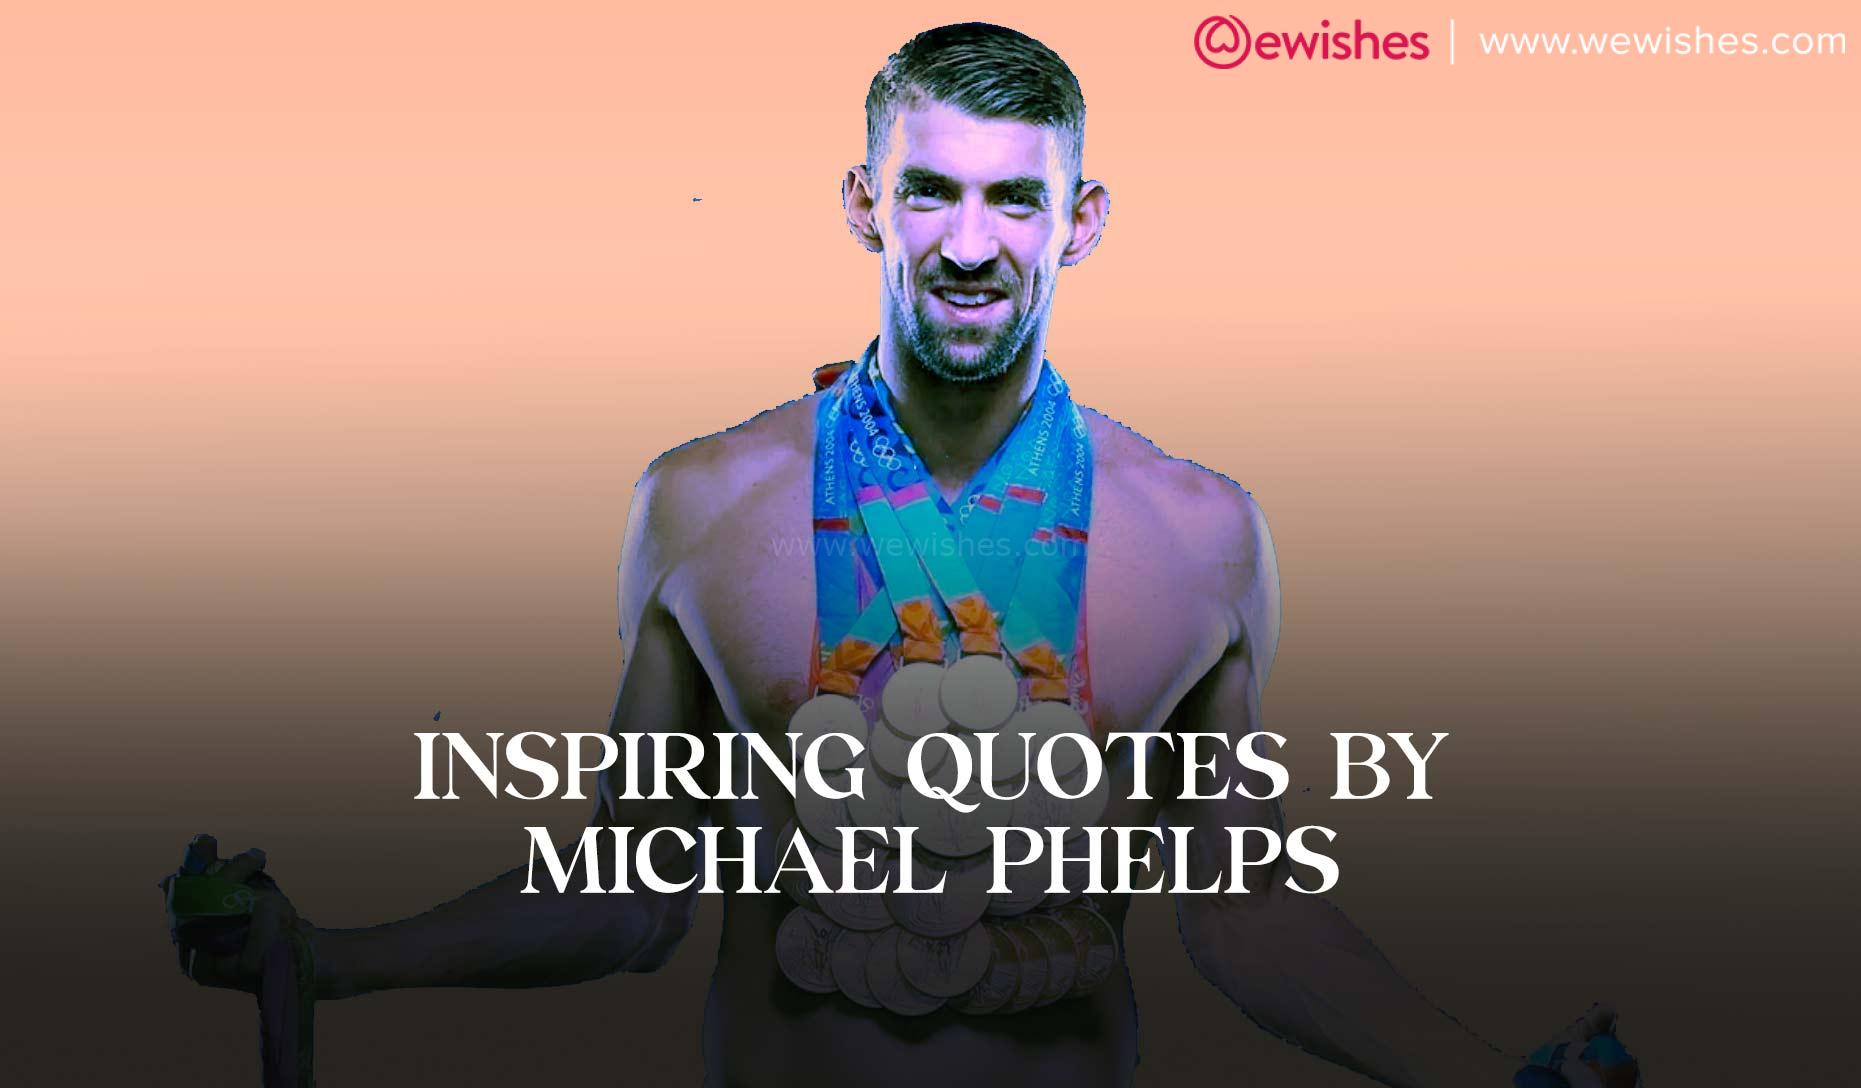 Inspiring Quotes by Michael Phelps